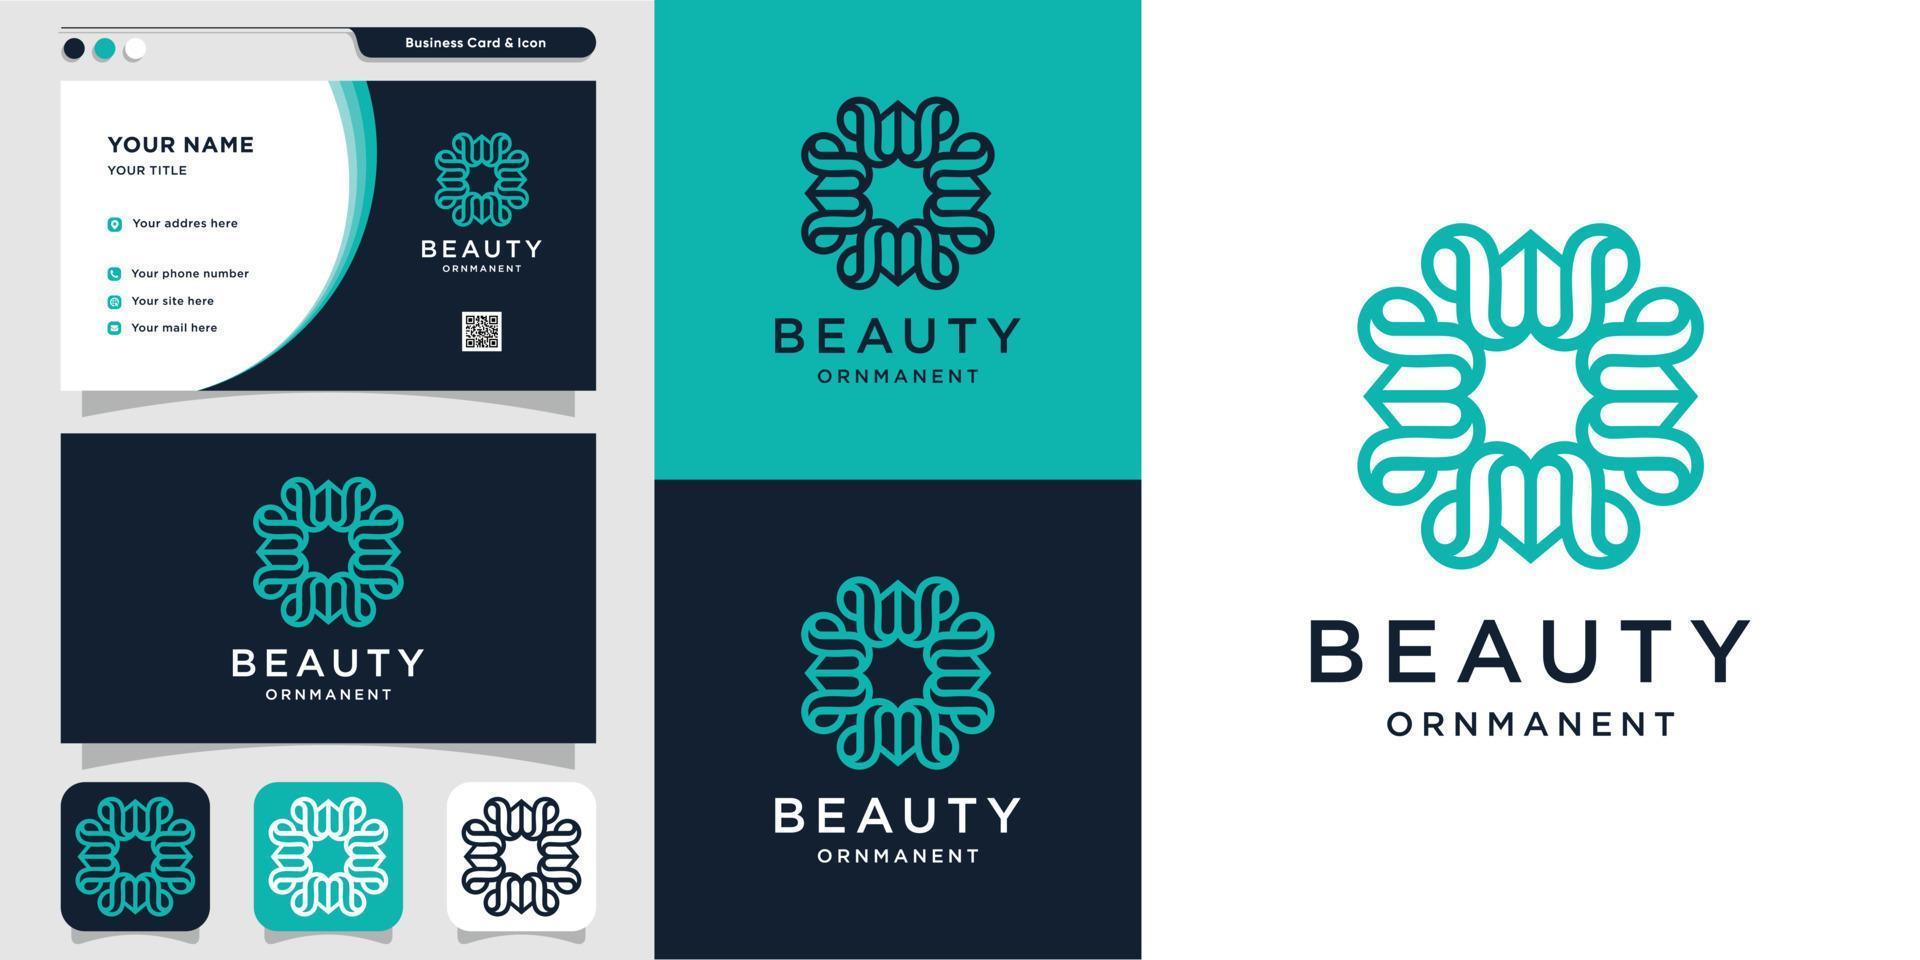 Beauty ornament with logo style and business card design, luxury, abstract, beauty, icon Premium Vector